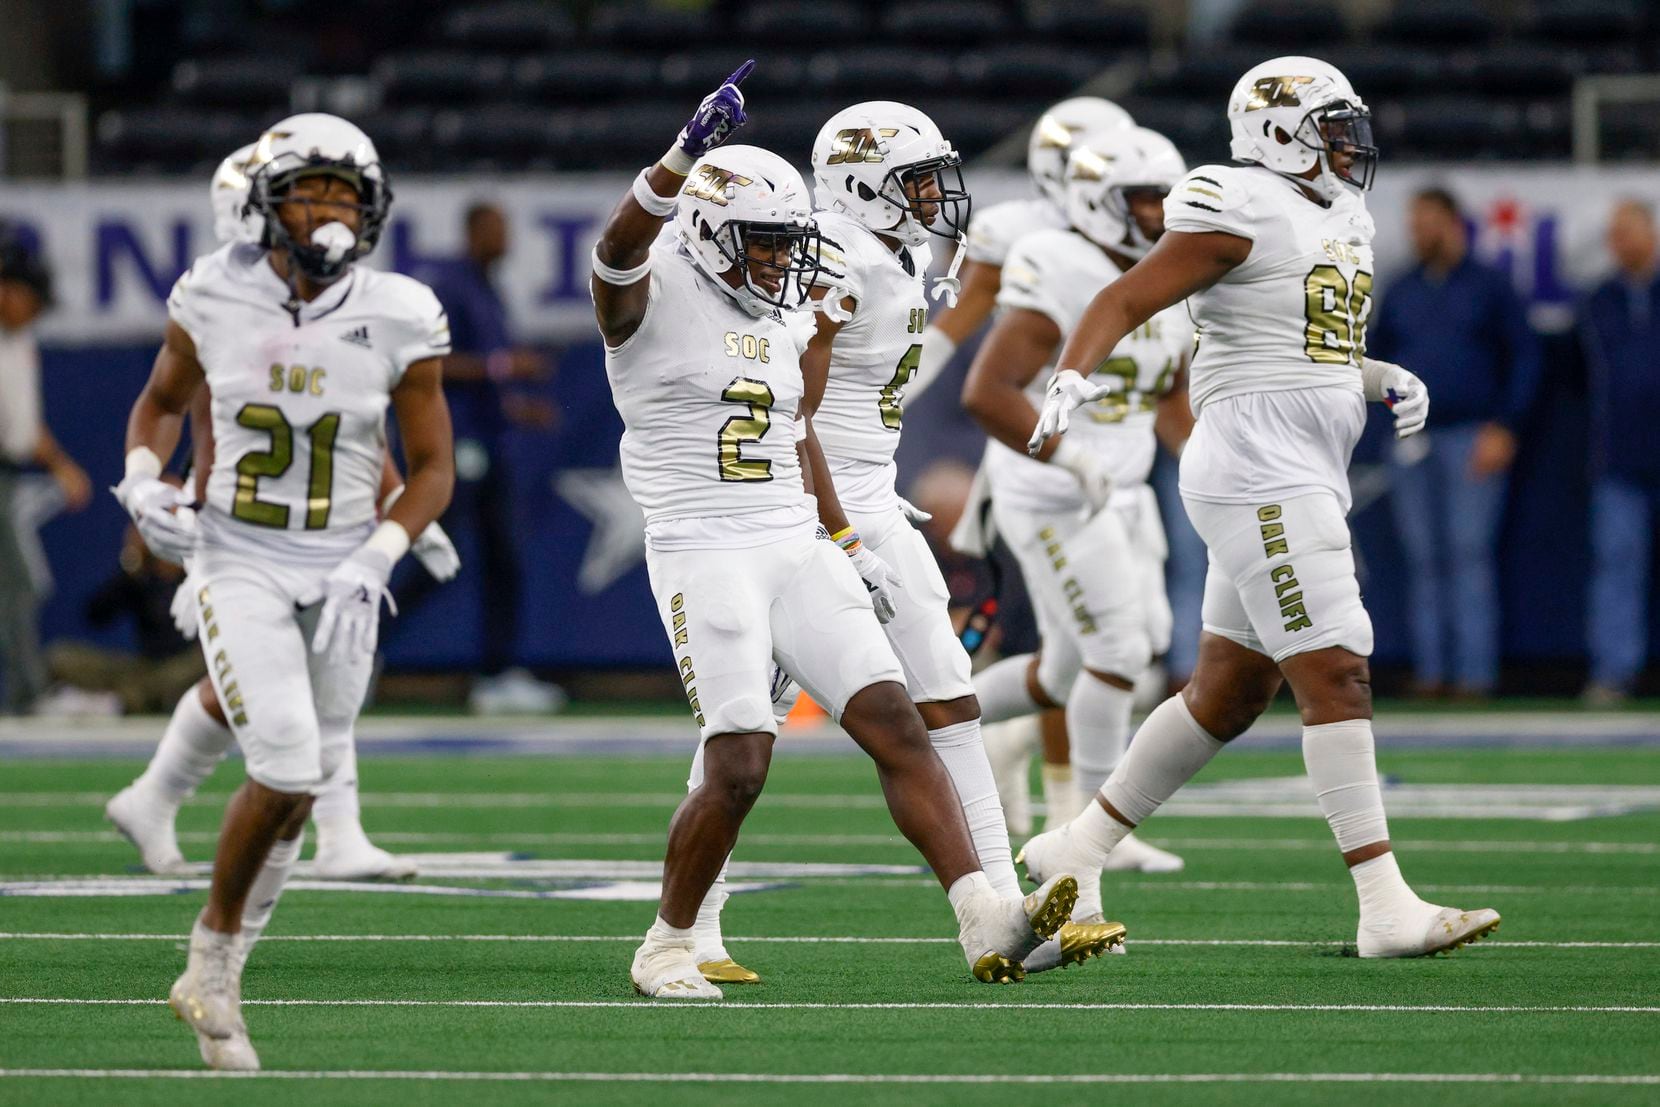 How to watch south oak cliff football